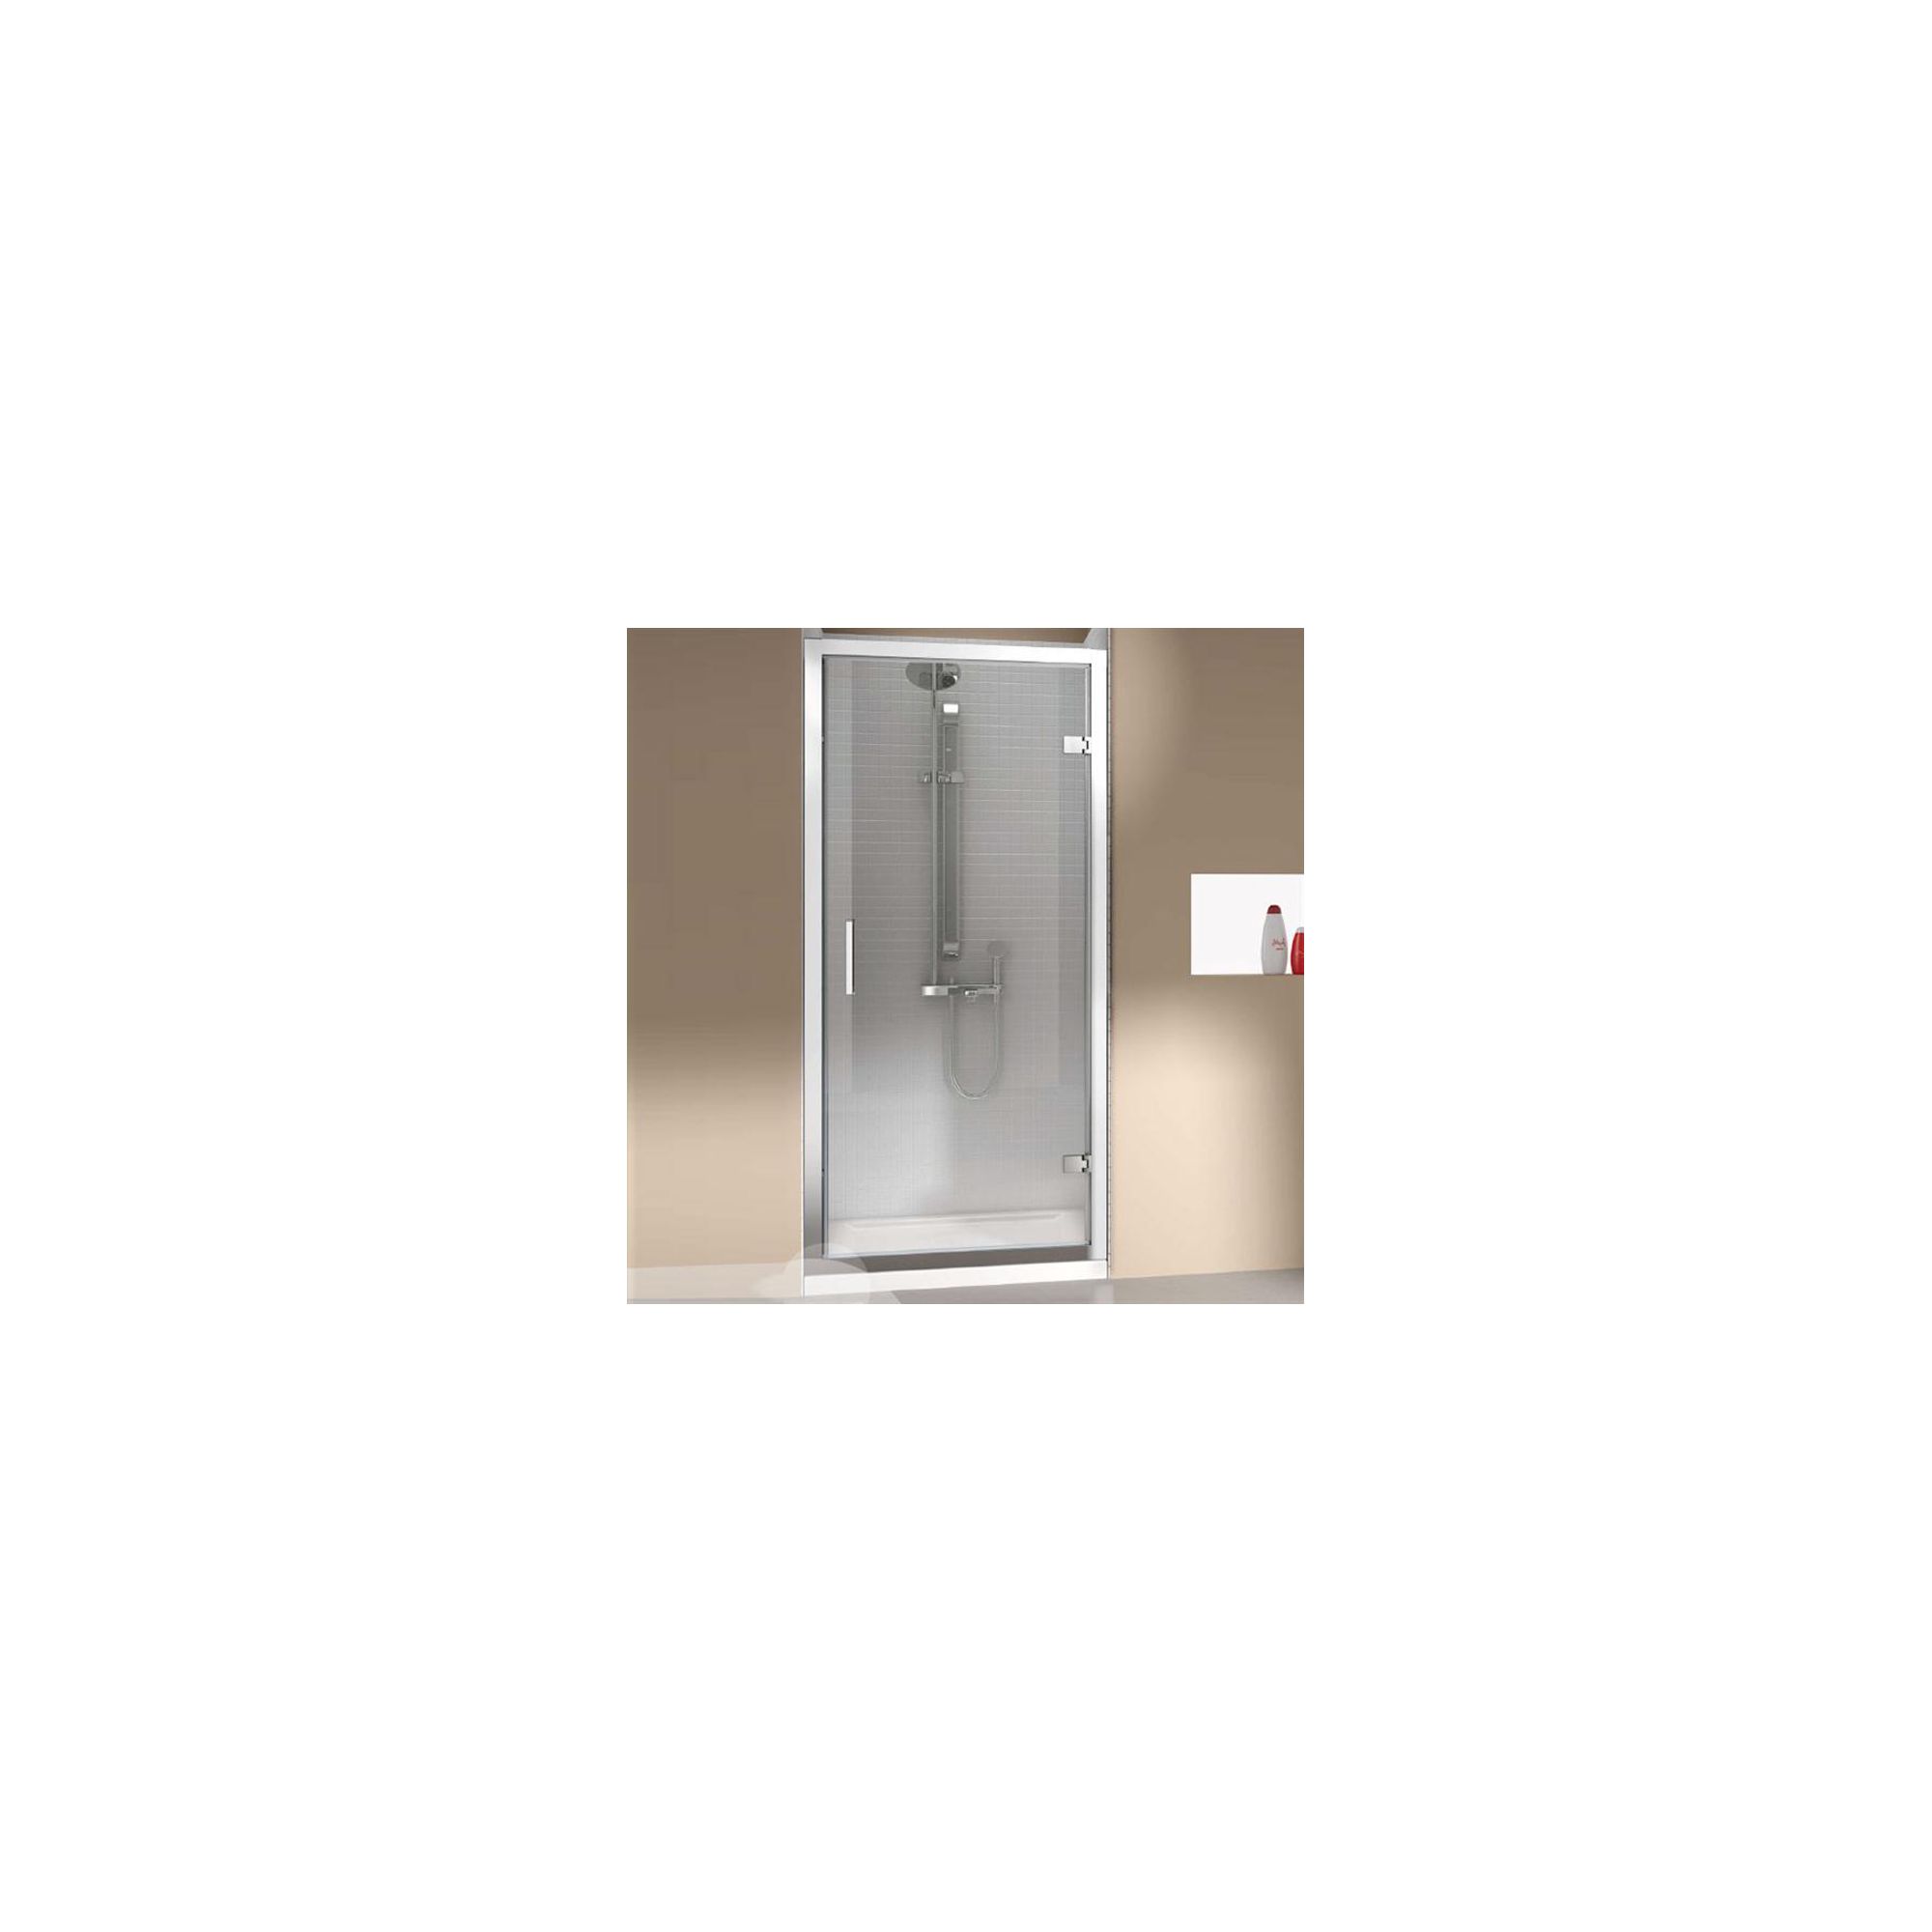 Merlyn Vivid Eight Hinged Shower Door, 900mm Wide, 8mm Glass at Tesco Direct